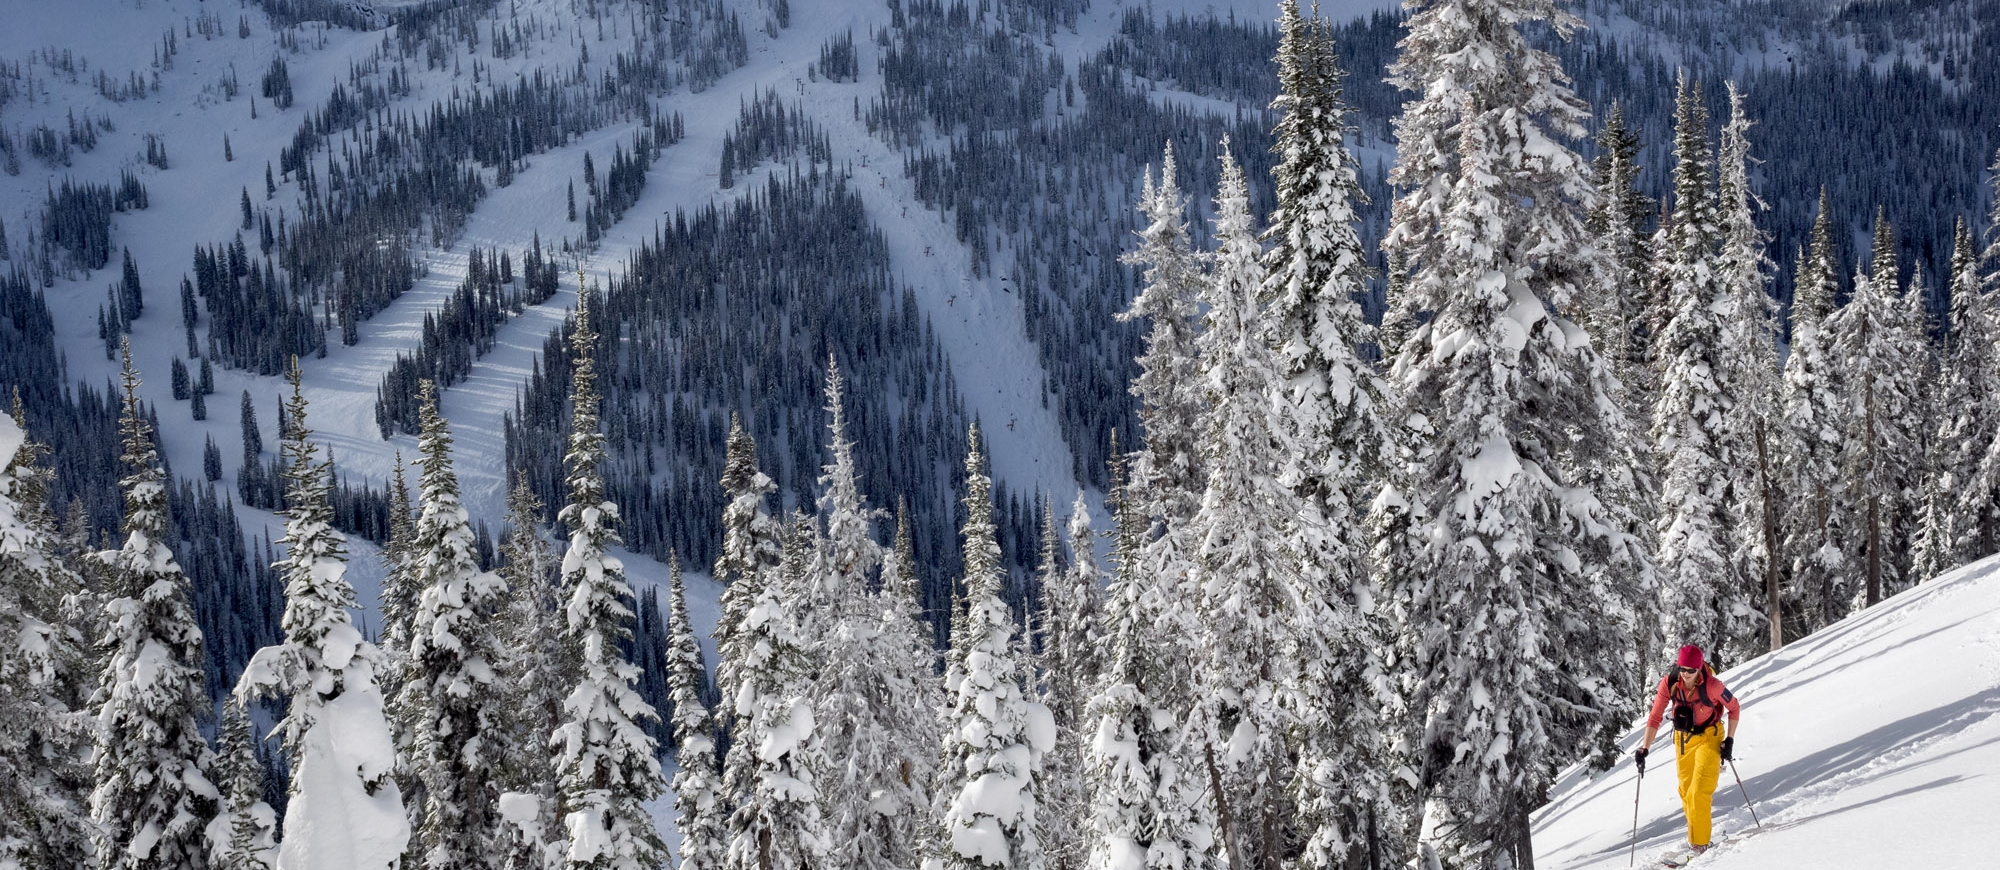 A person ski touring in the backcountry near Whitewater Ski Resort.